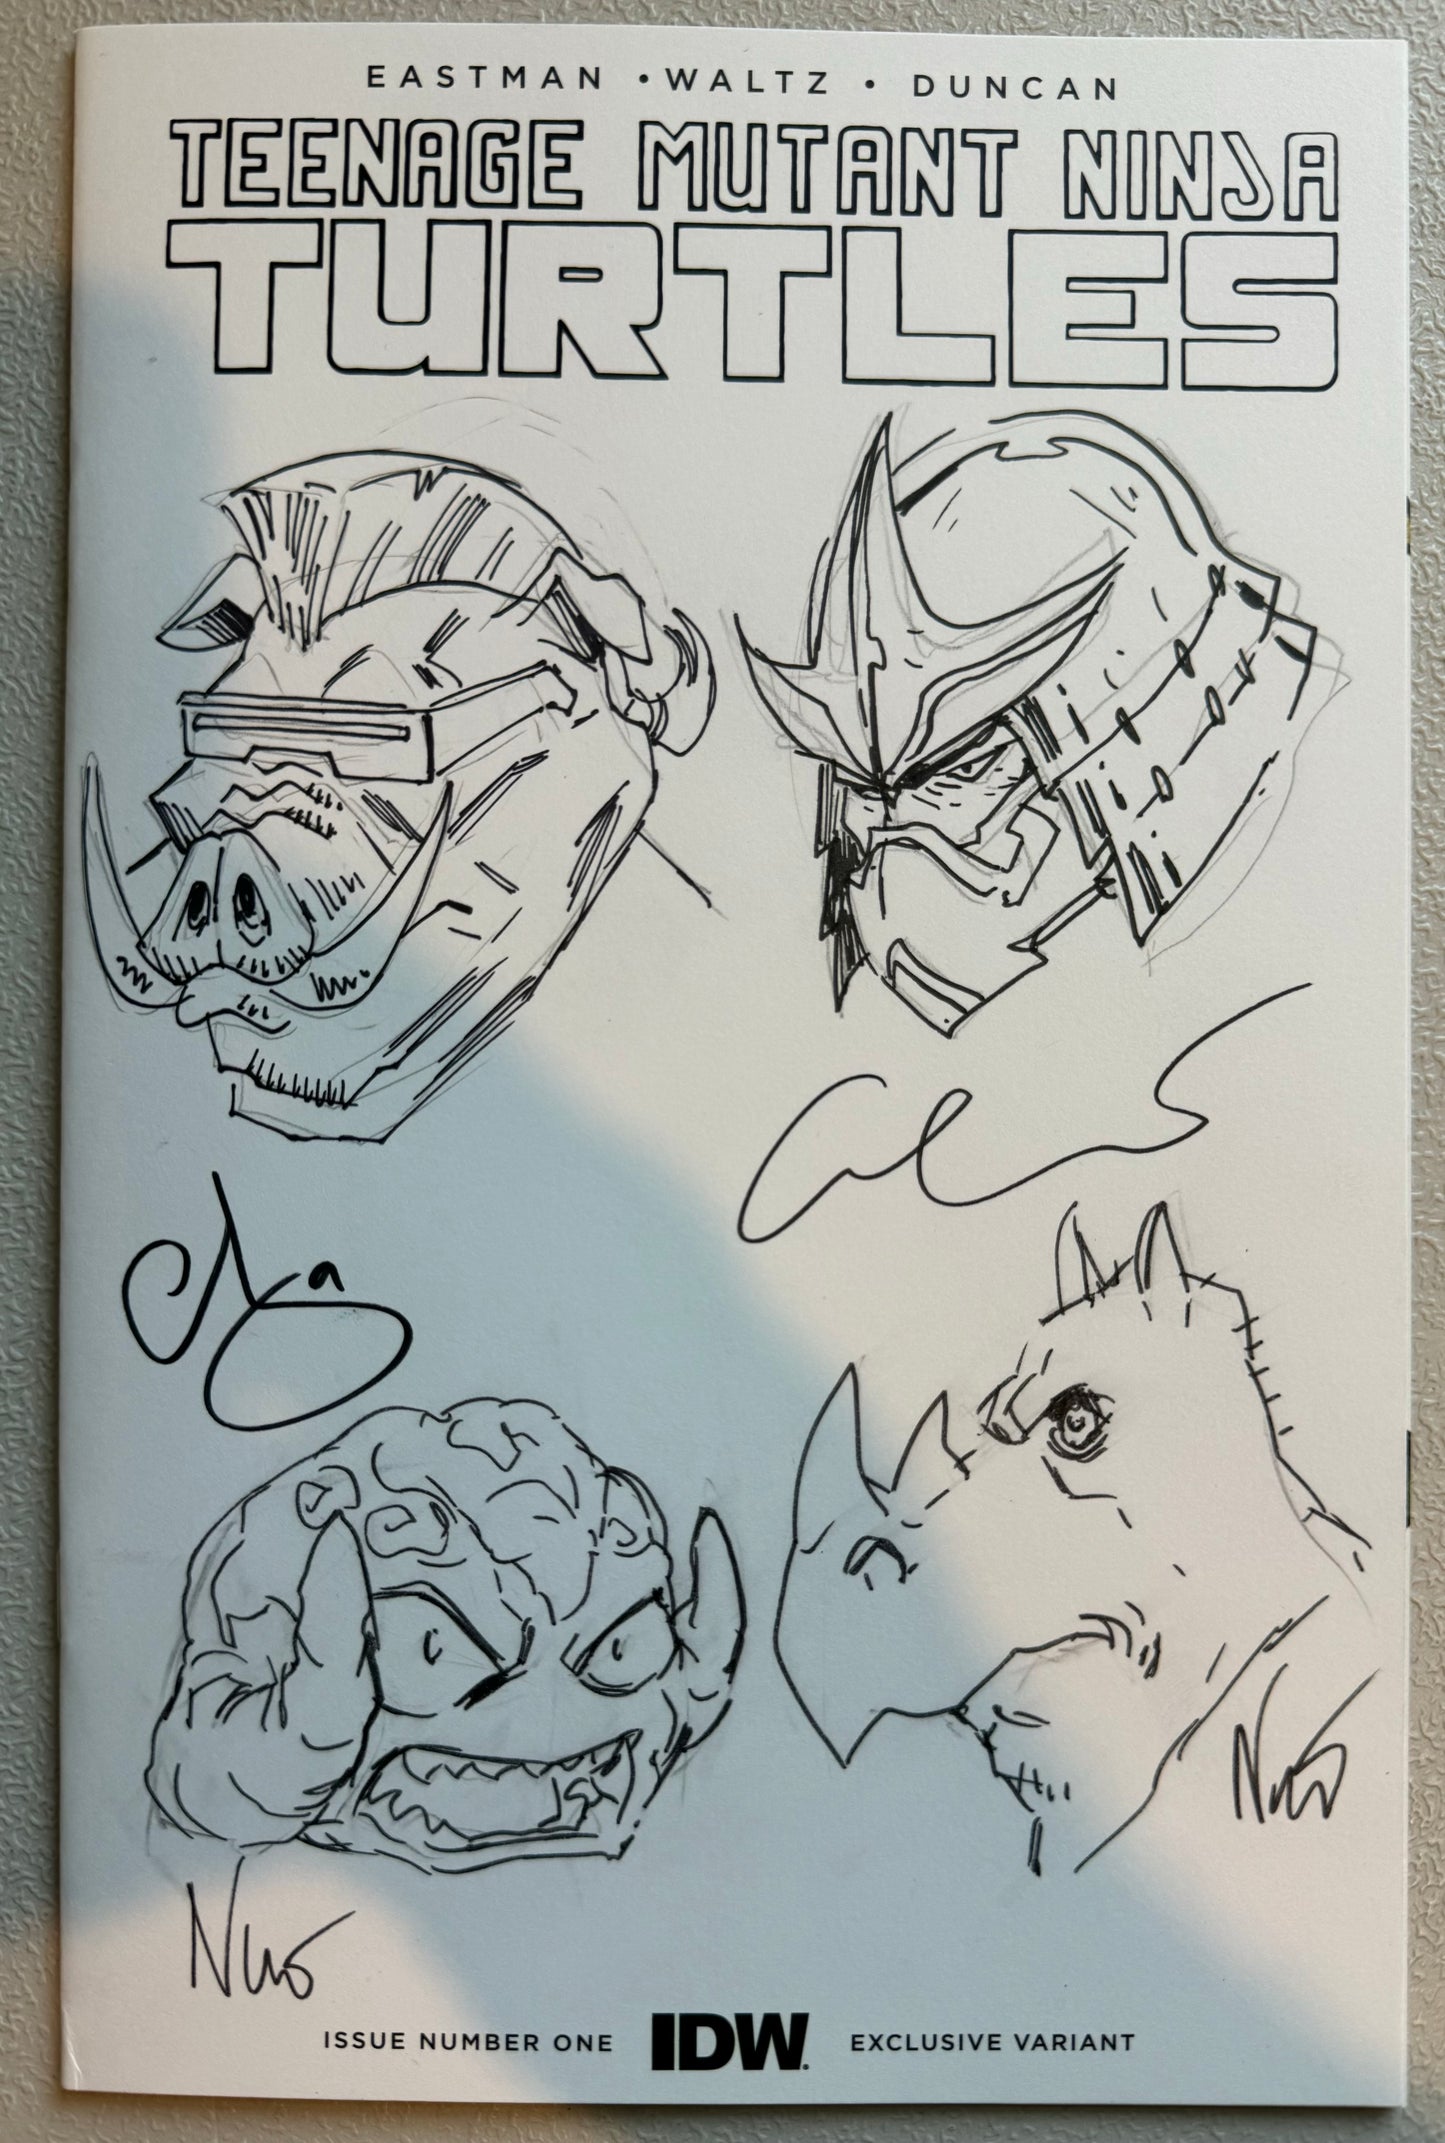 Teenage Mutant Ninja Turtles #1 NYCC 2023 Whatnot Sketch Cover Signed & Sketches From Eddie Núñez, The Escorza Brothers w/certificate of authenticity (Reprints TMNT #1 , 8/2011 from IDW)